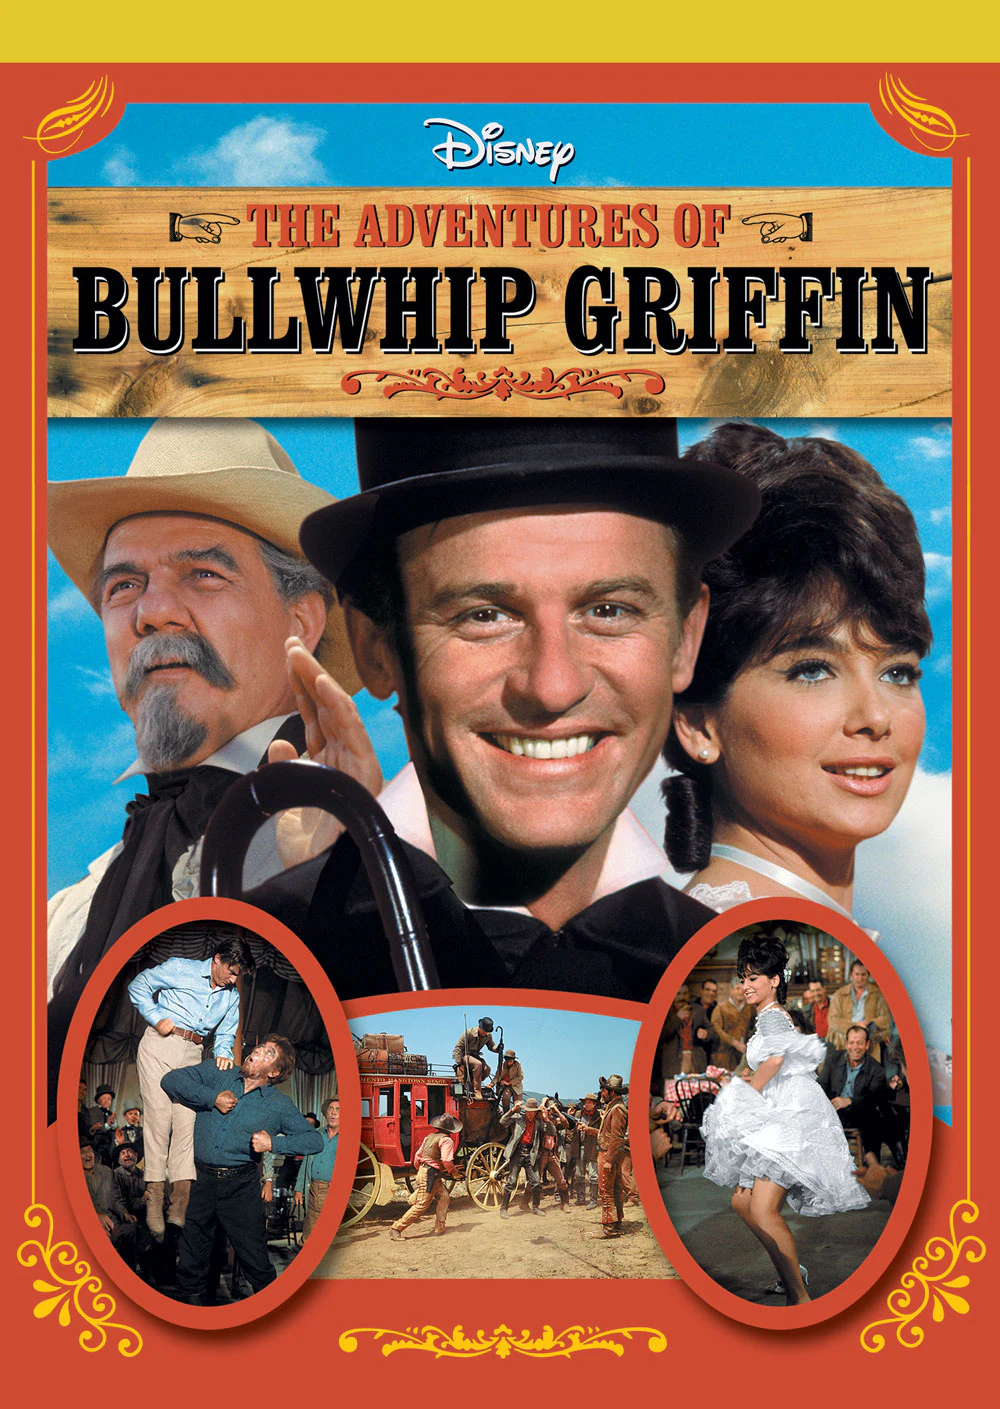     The Adventures of Bullwhip Griffin